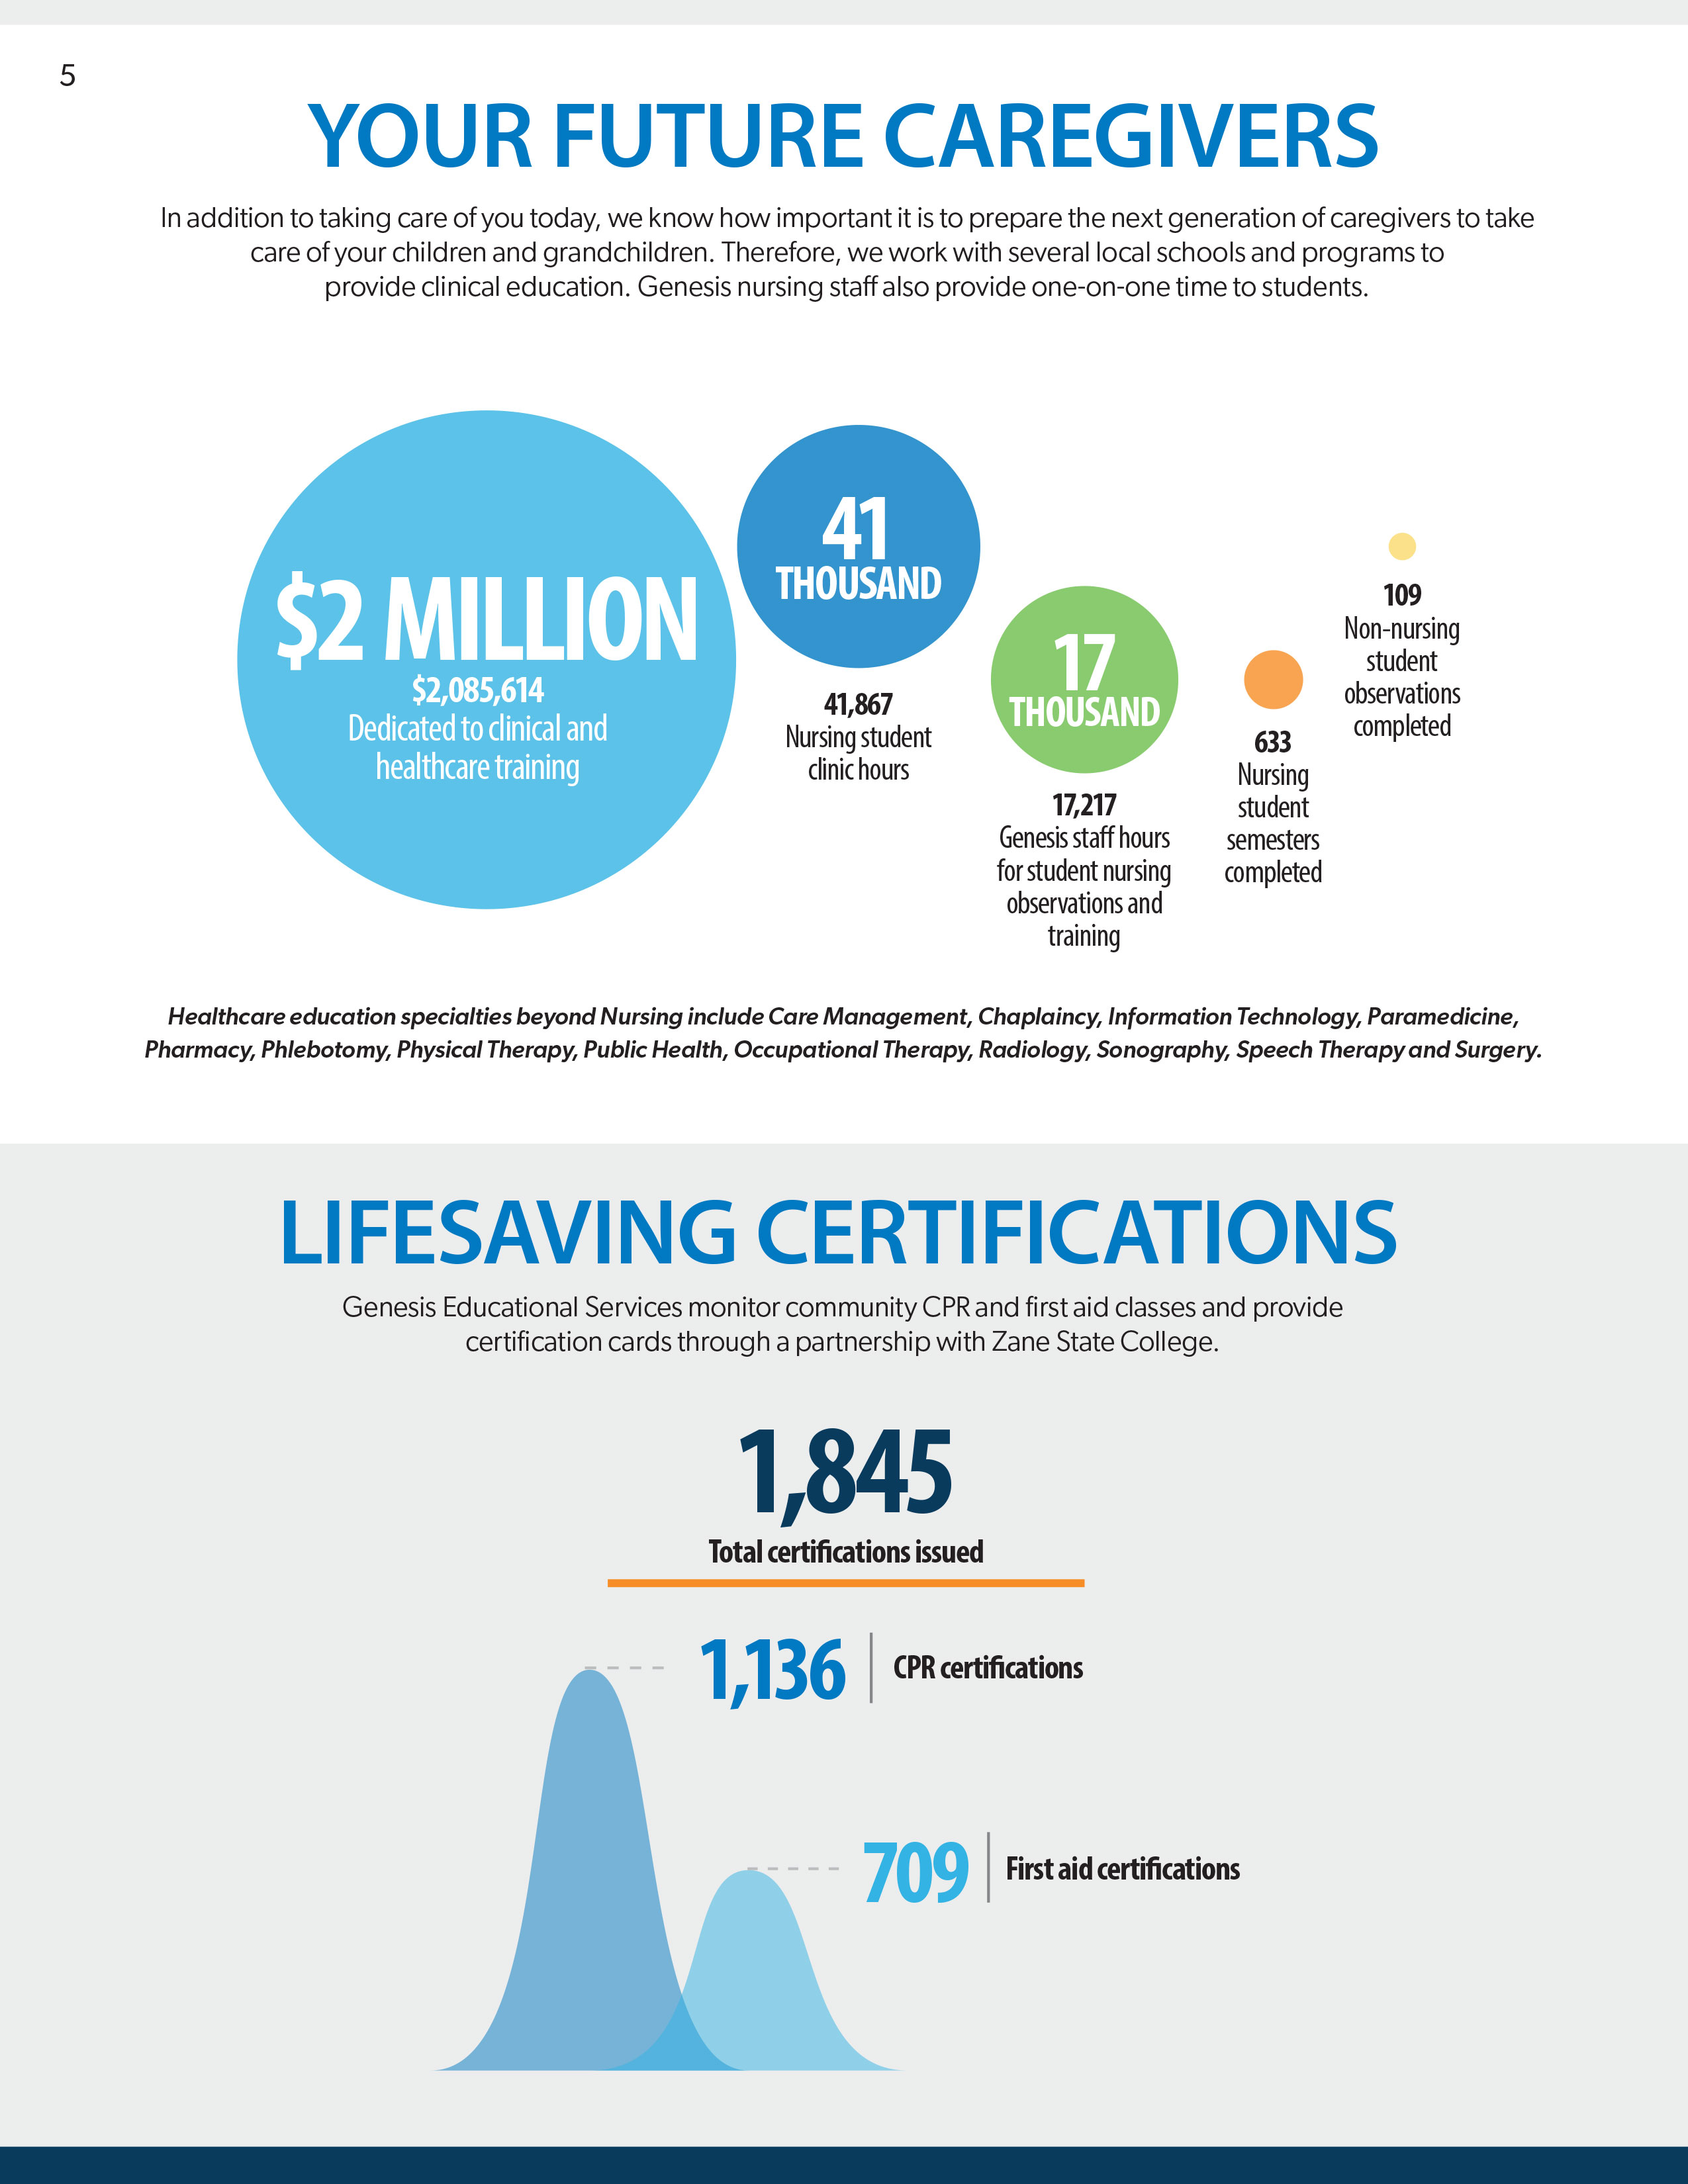 Your future caregivers and lifesaving certifications